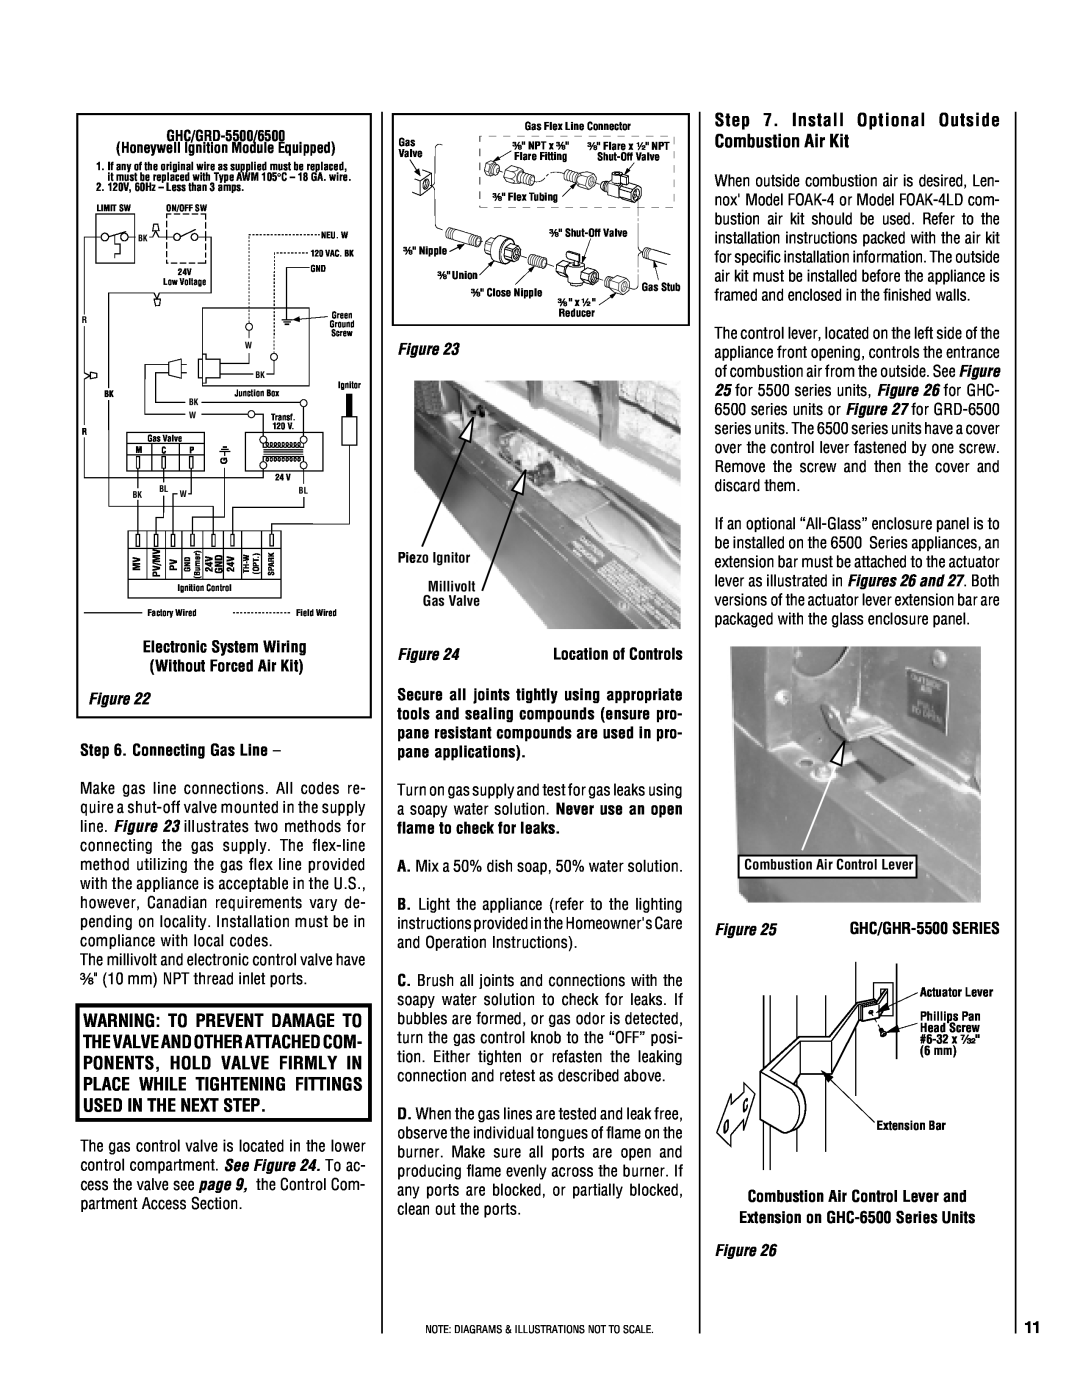 Superior GHC/GRD-5500 installation instructions Electronic System Wiring Without Forced Air Kit, Connecting Gas Line 